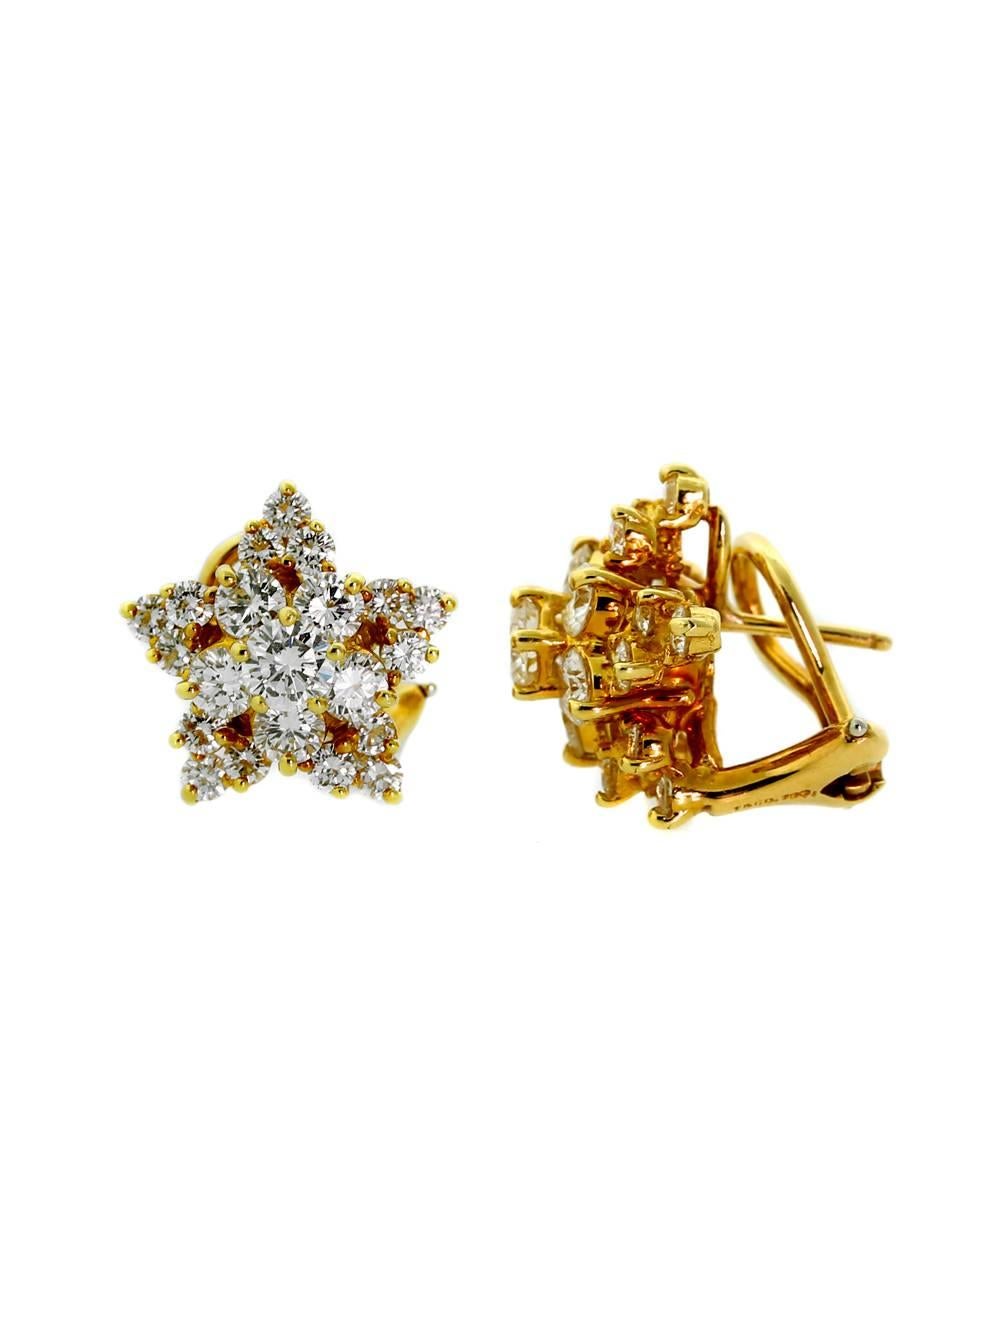 A fabulous pair of authentic Tiffany & Co diamond star earrings crafted in 18k yellow gold and adorned with the finest Tiffany & Co Vs Quality diamonds 3cts.

Dimensions: 16mm in diameter (.62″)

Inventory ID: 0000002